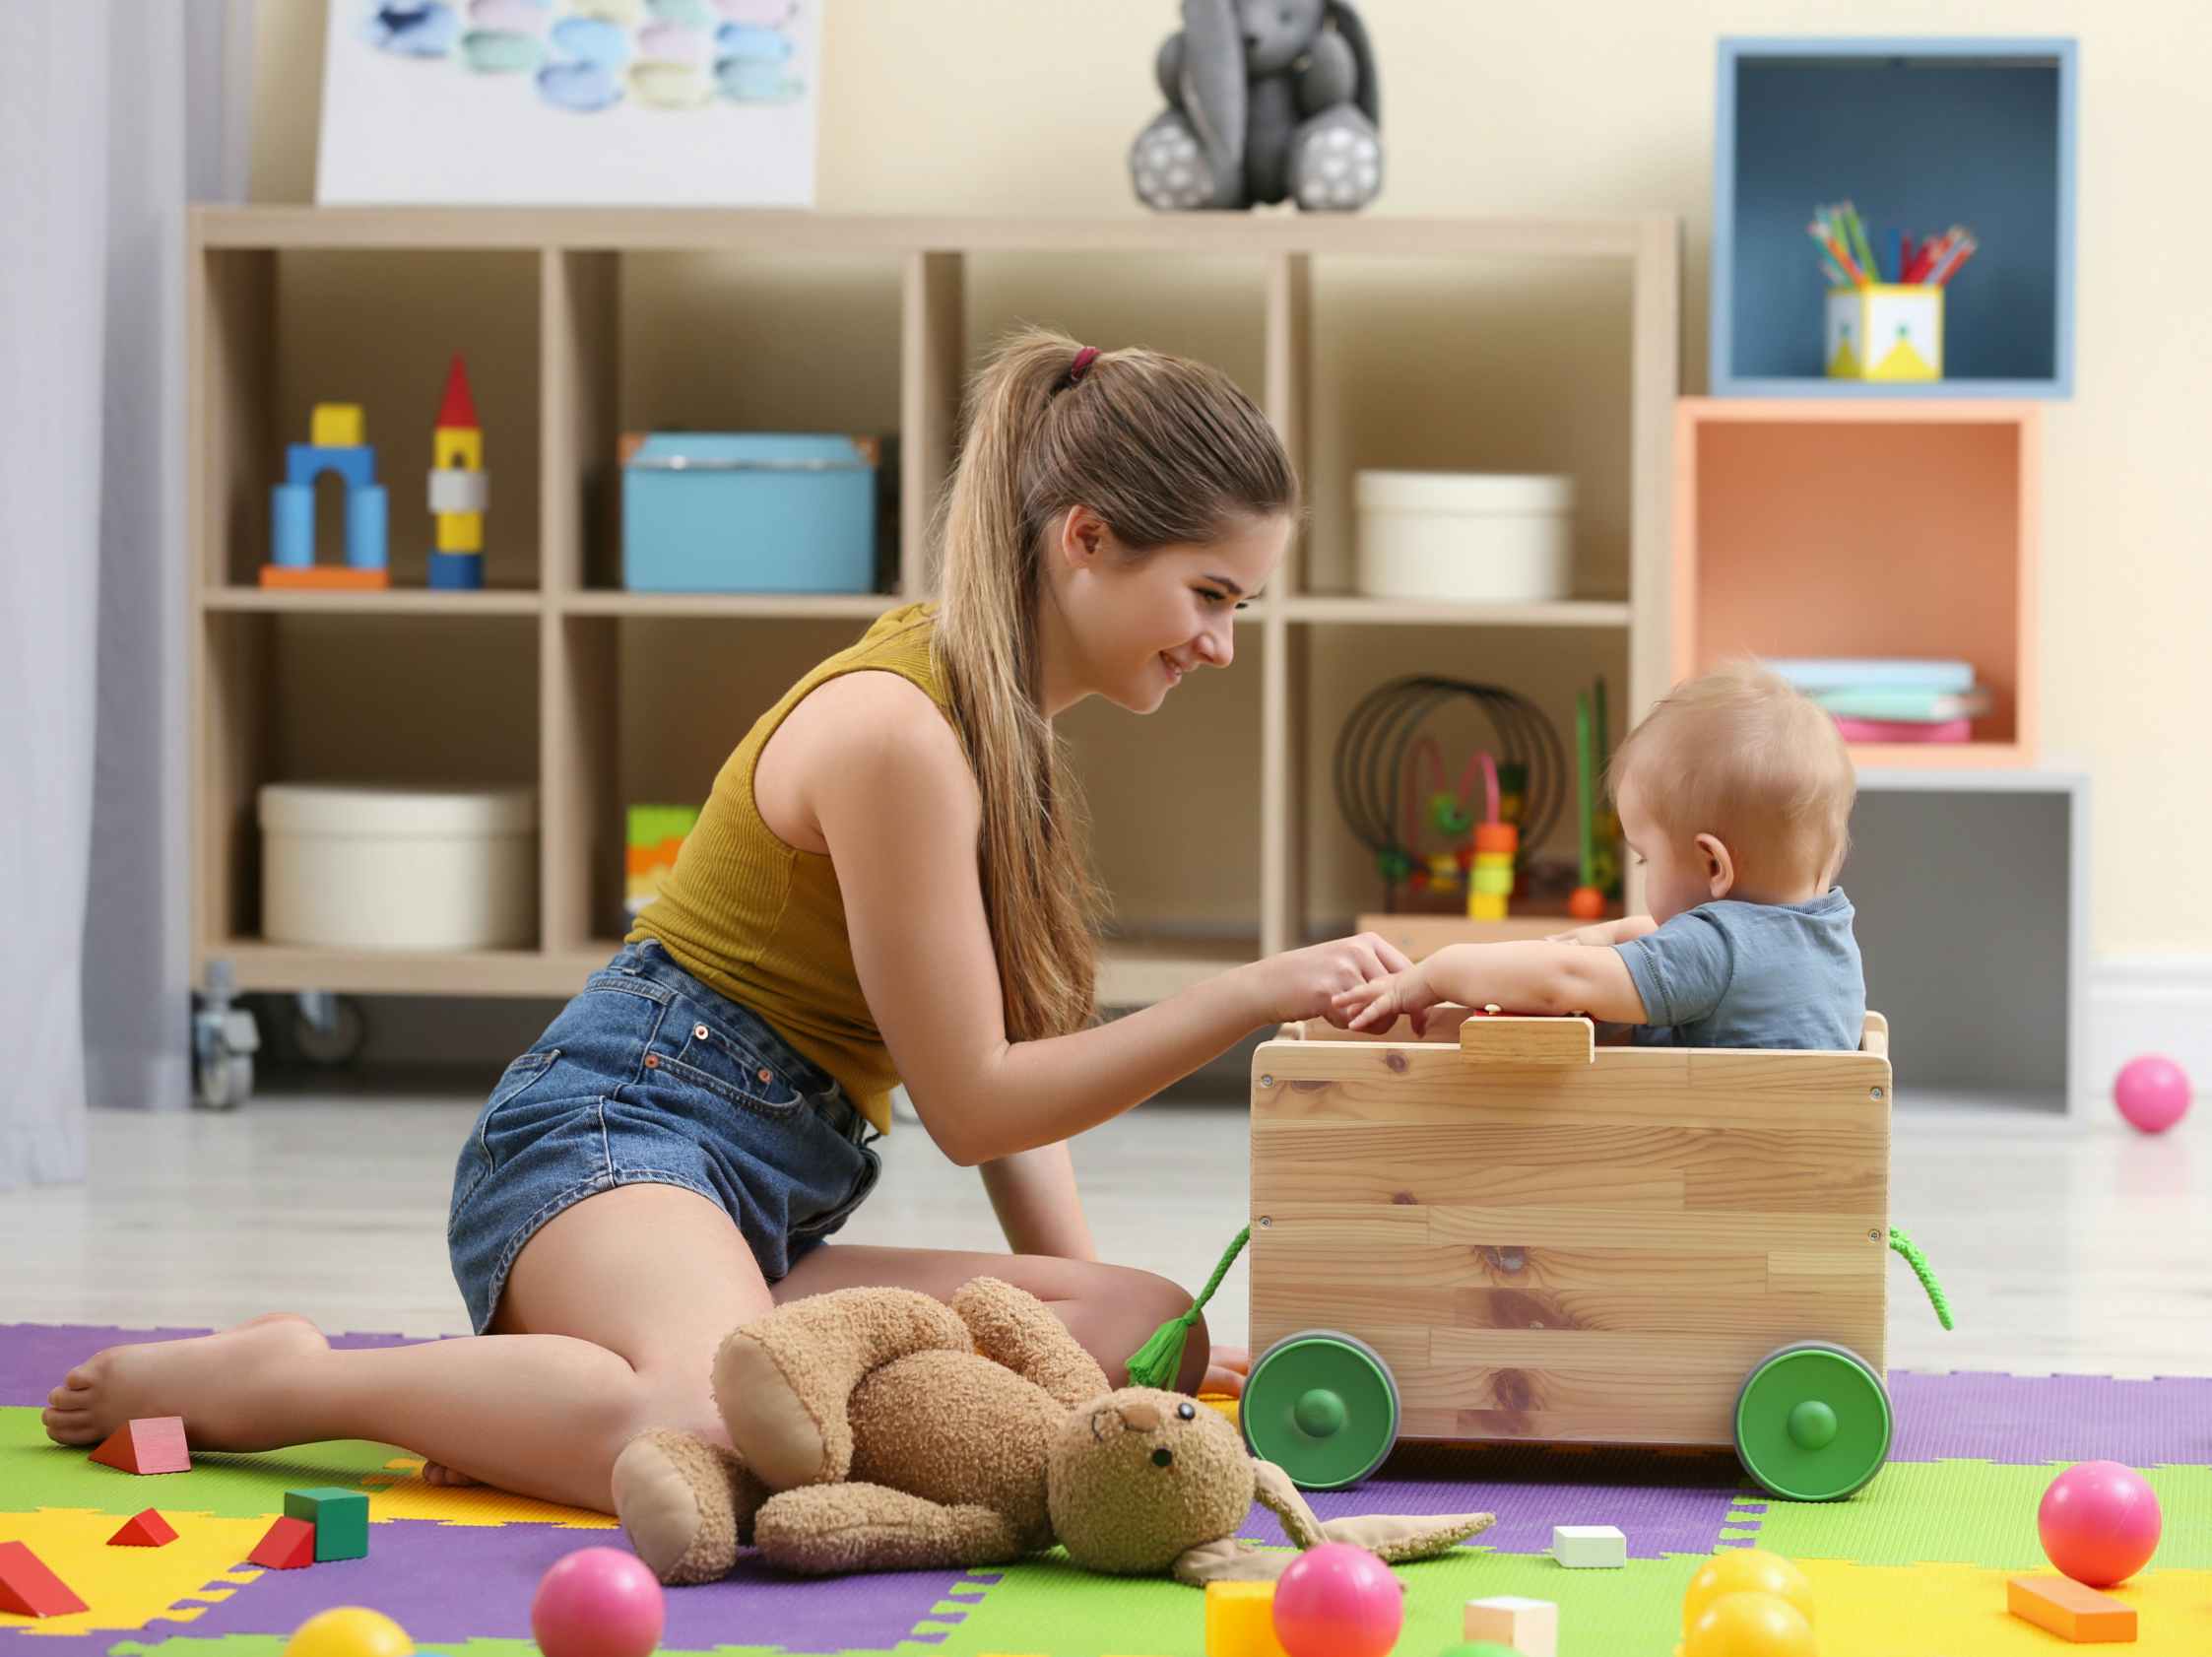 teenage girl babysitter playing with baby in playroom